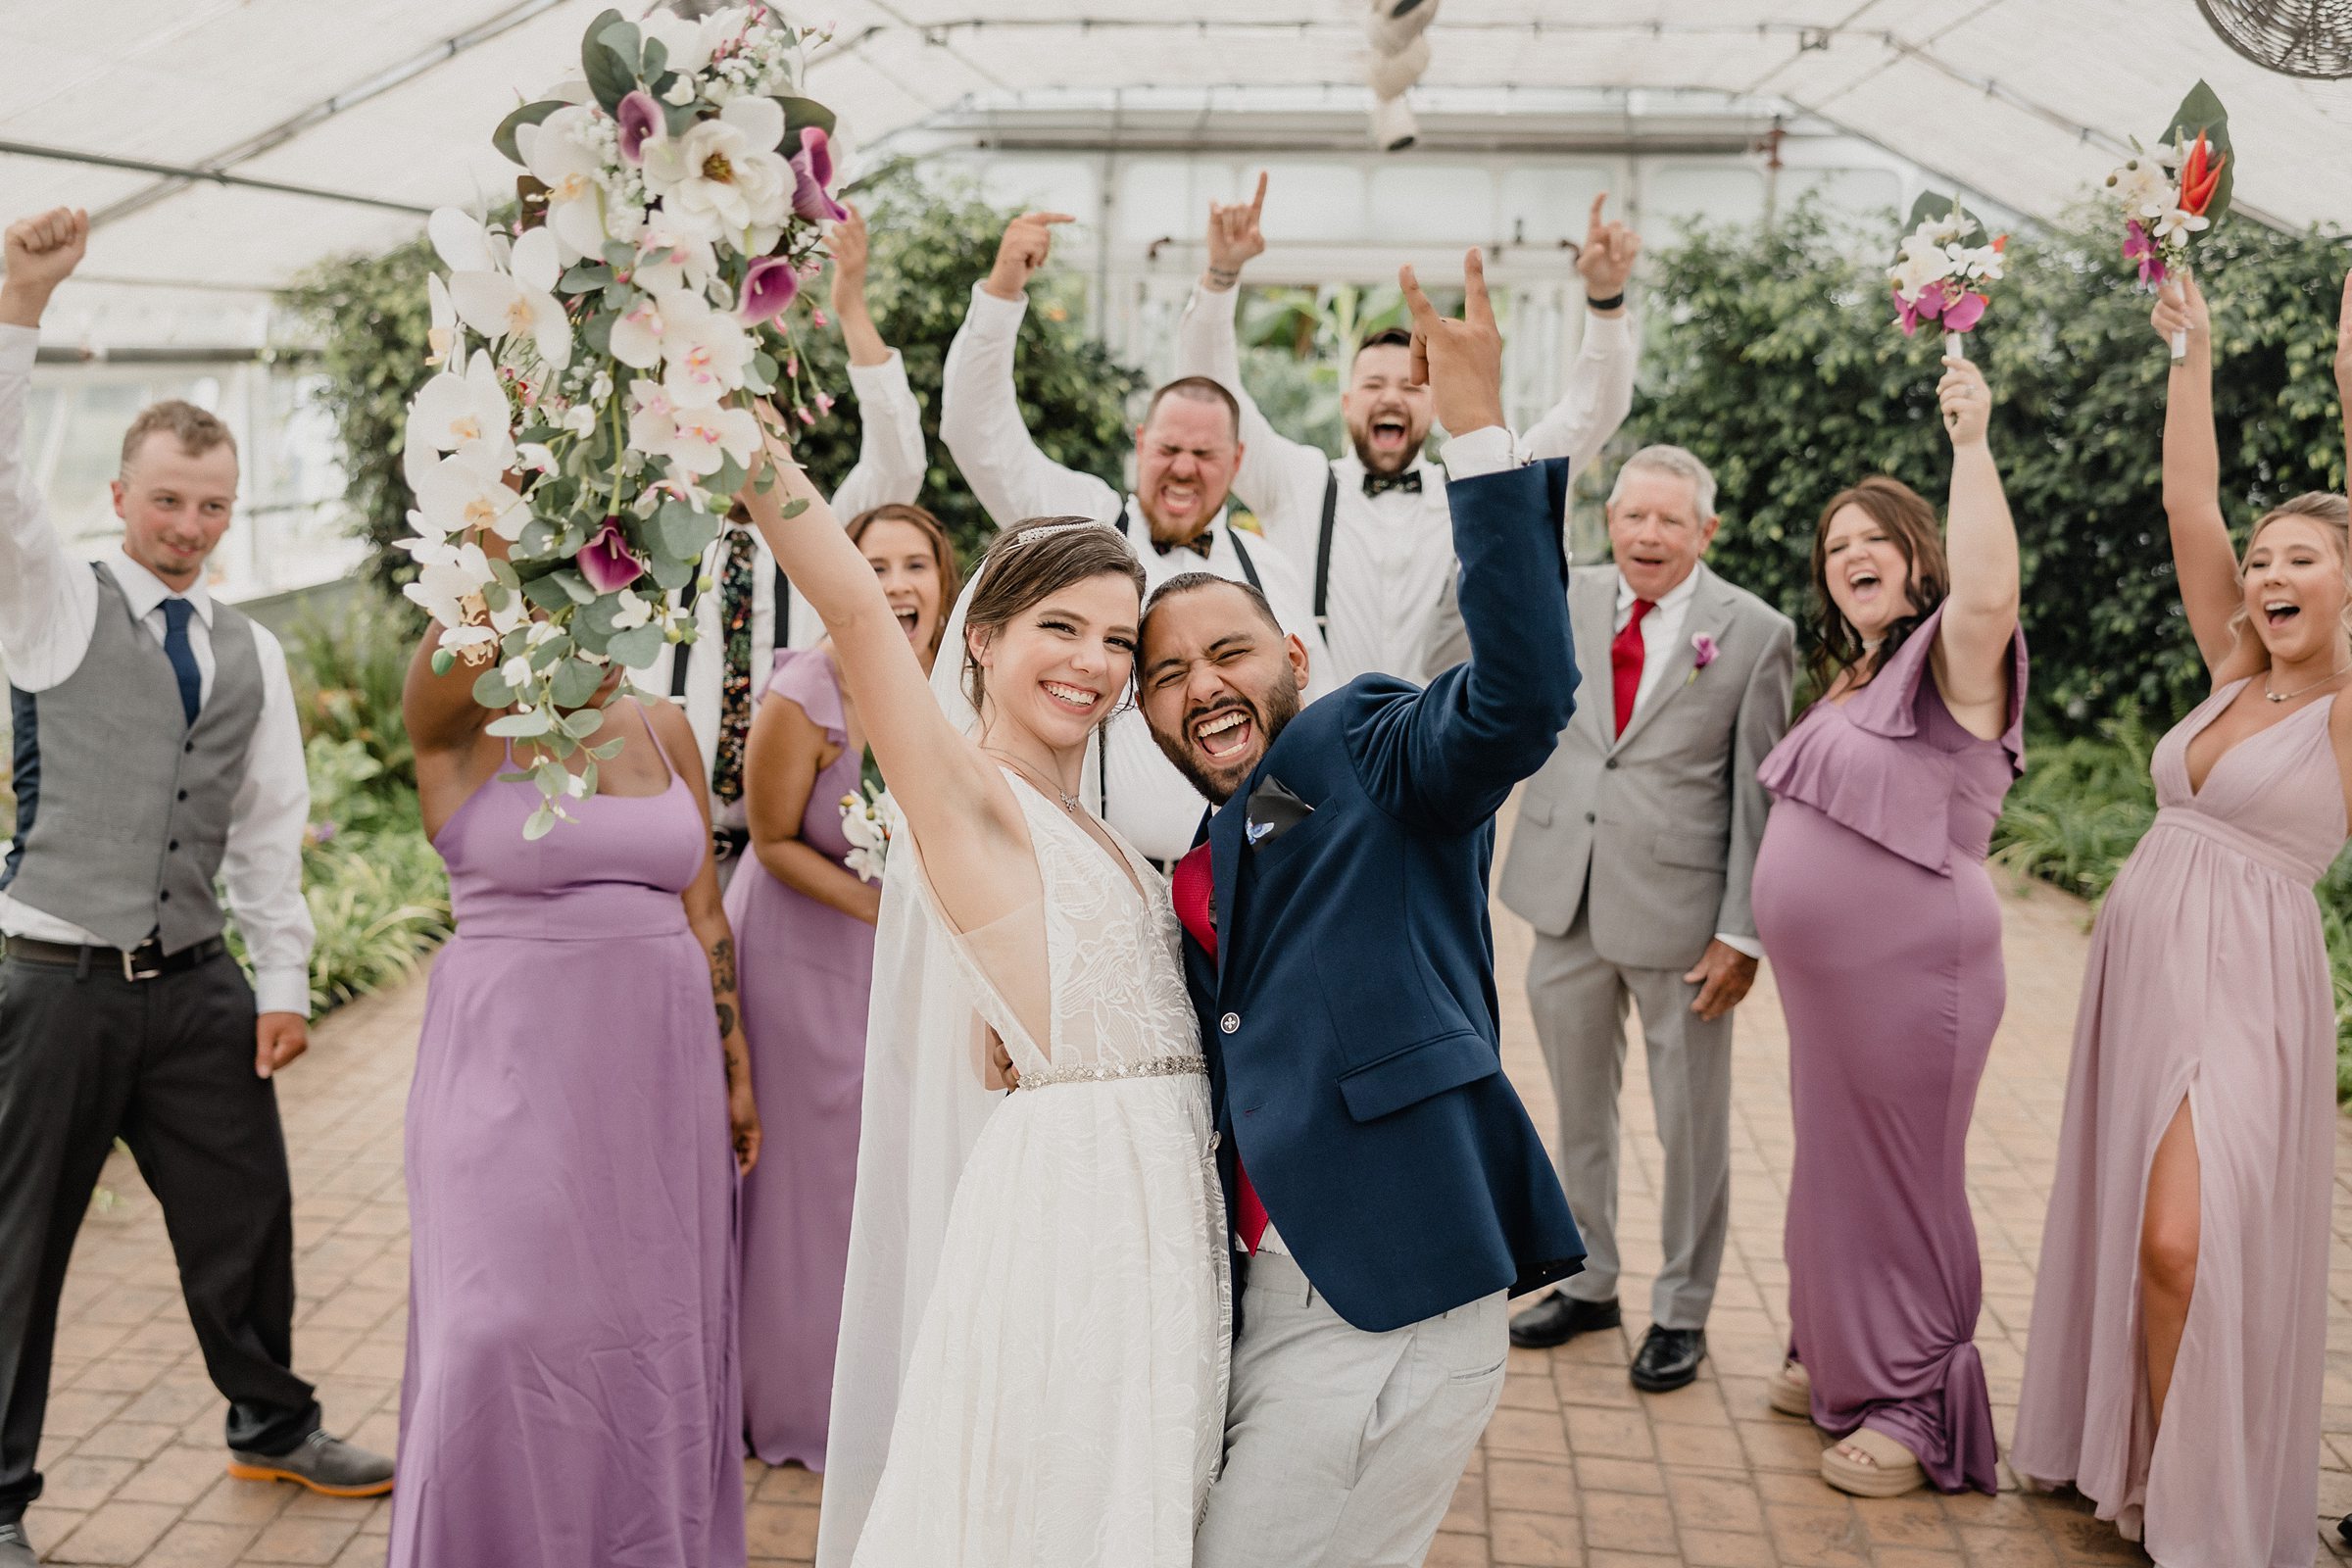 Bride and groom celebrate with their bridal party during their wedding at the Bird Haven Greenhouse & Conservatory in Joliet, Illinois.